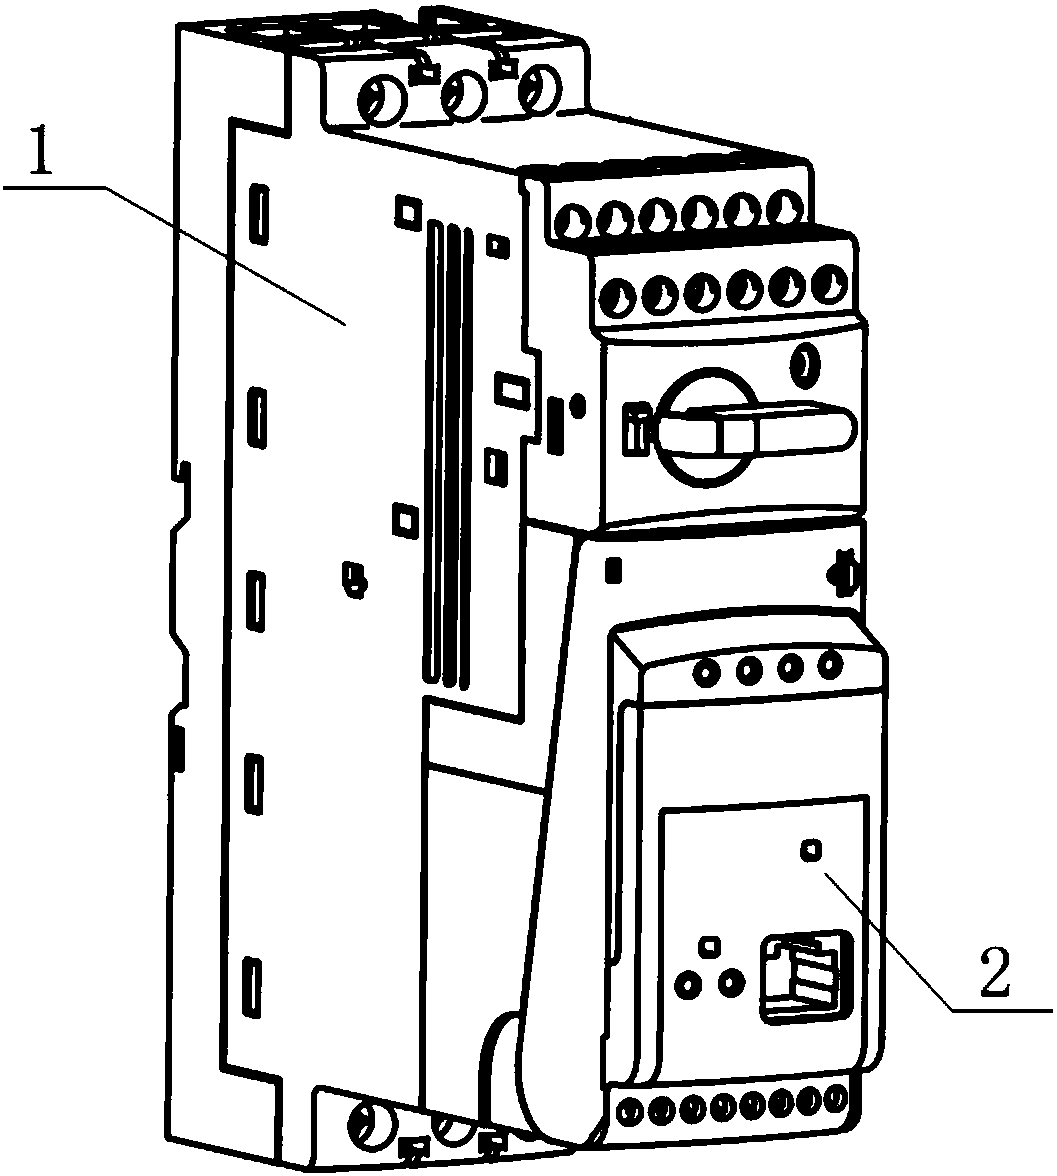 Display and control equipment for man-machine interaction for switch apparatus